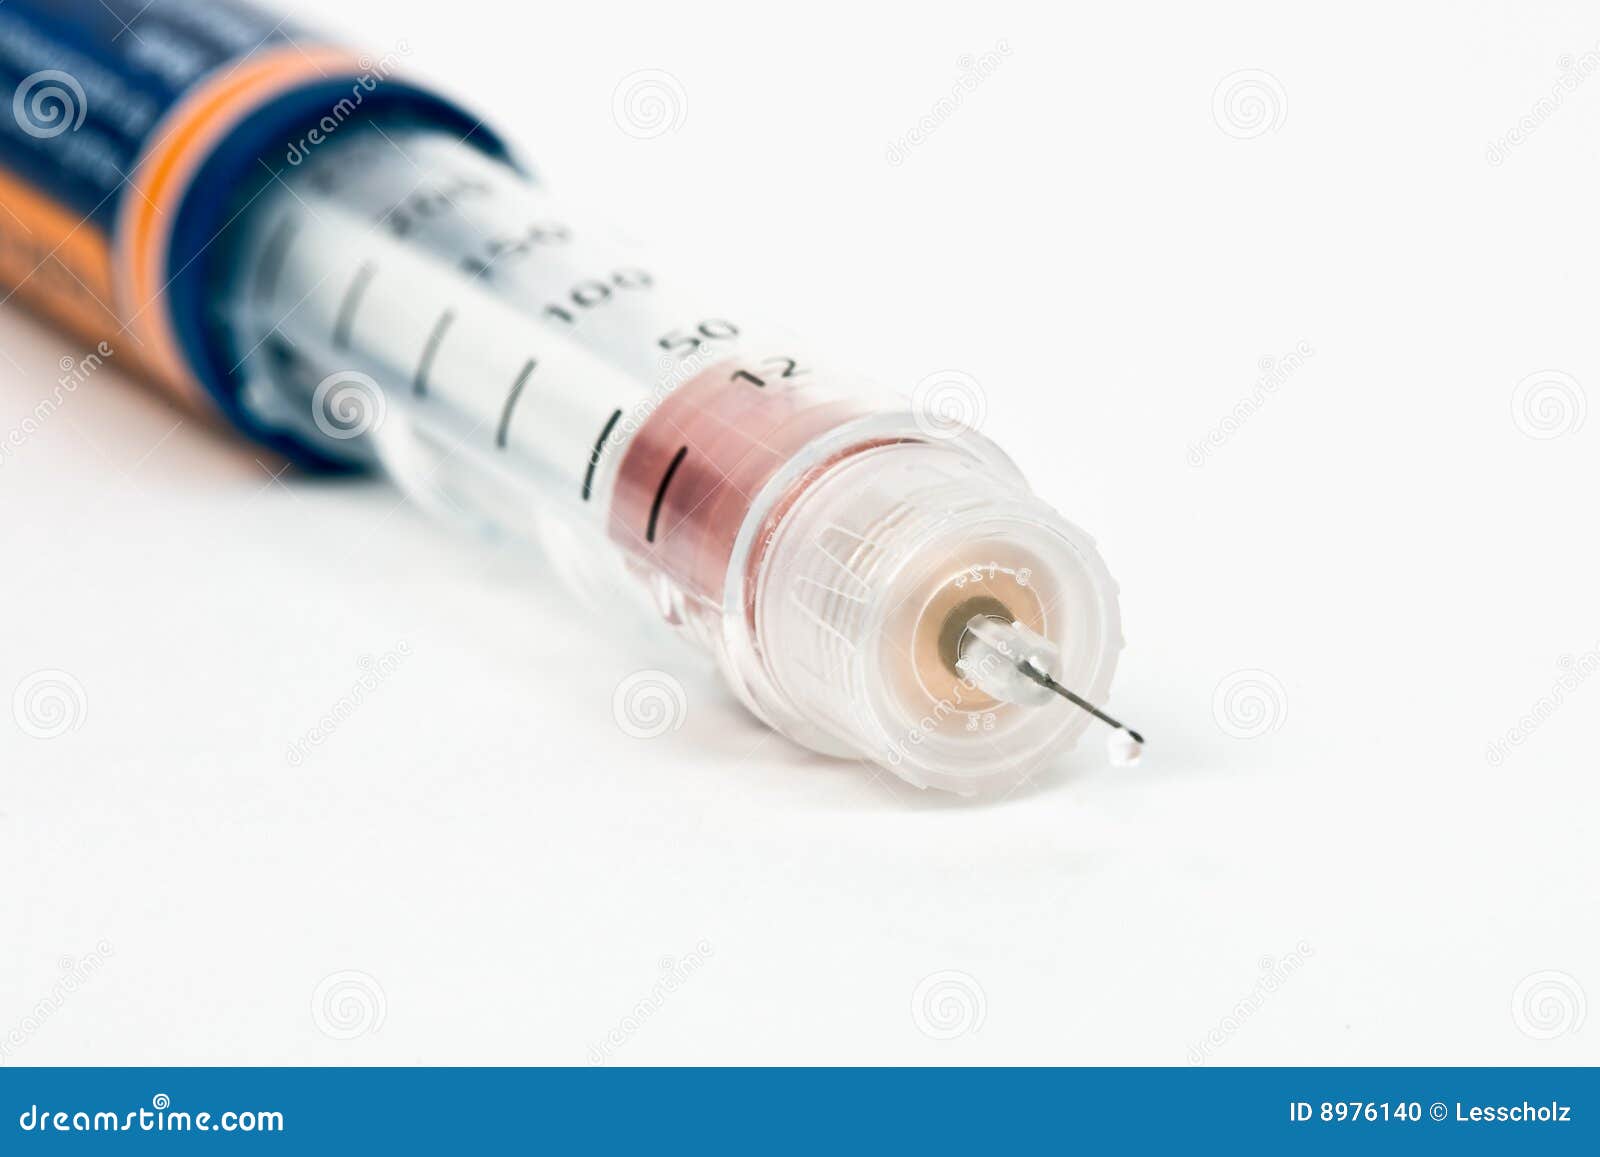 disposable insulin injection pen